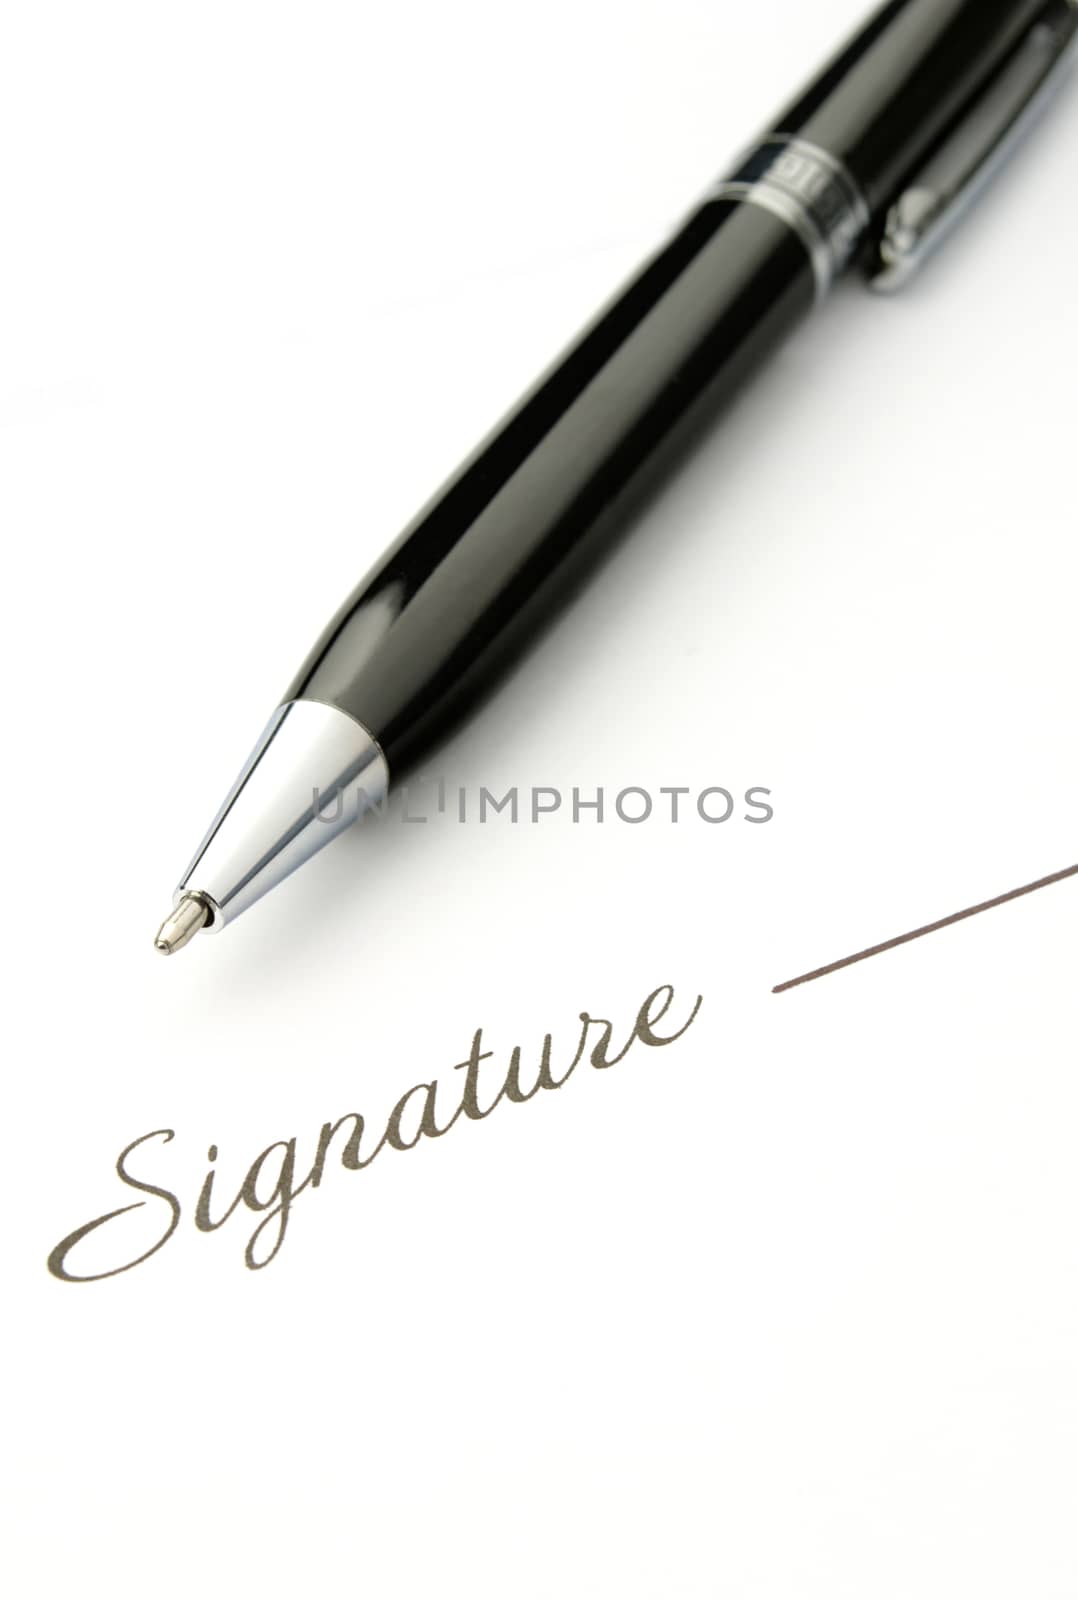 black ballpoint pen and place for the signature